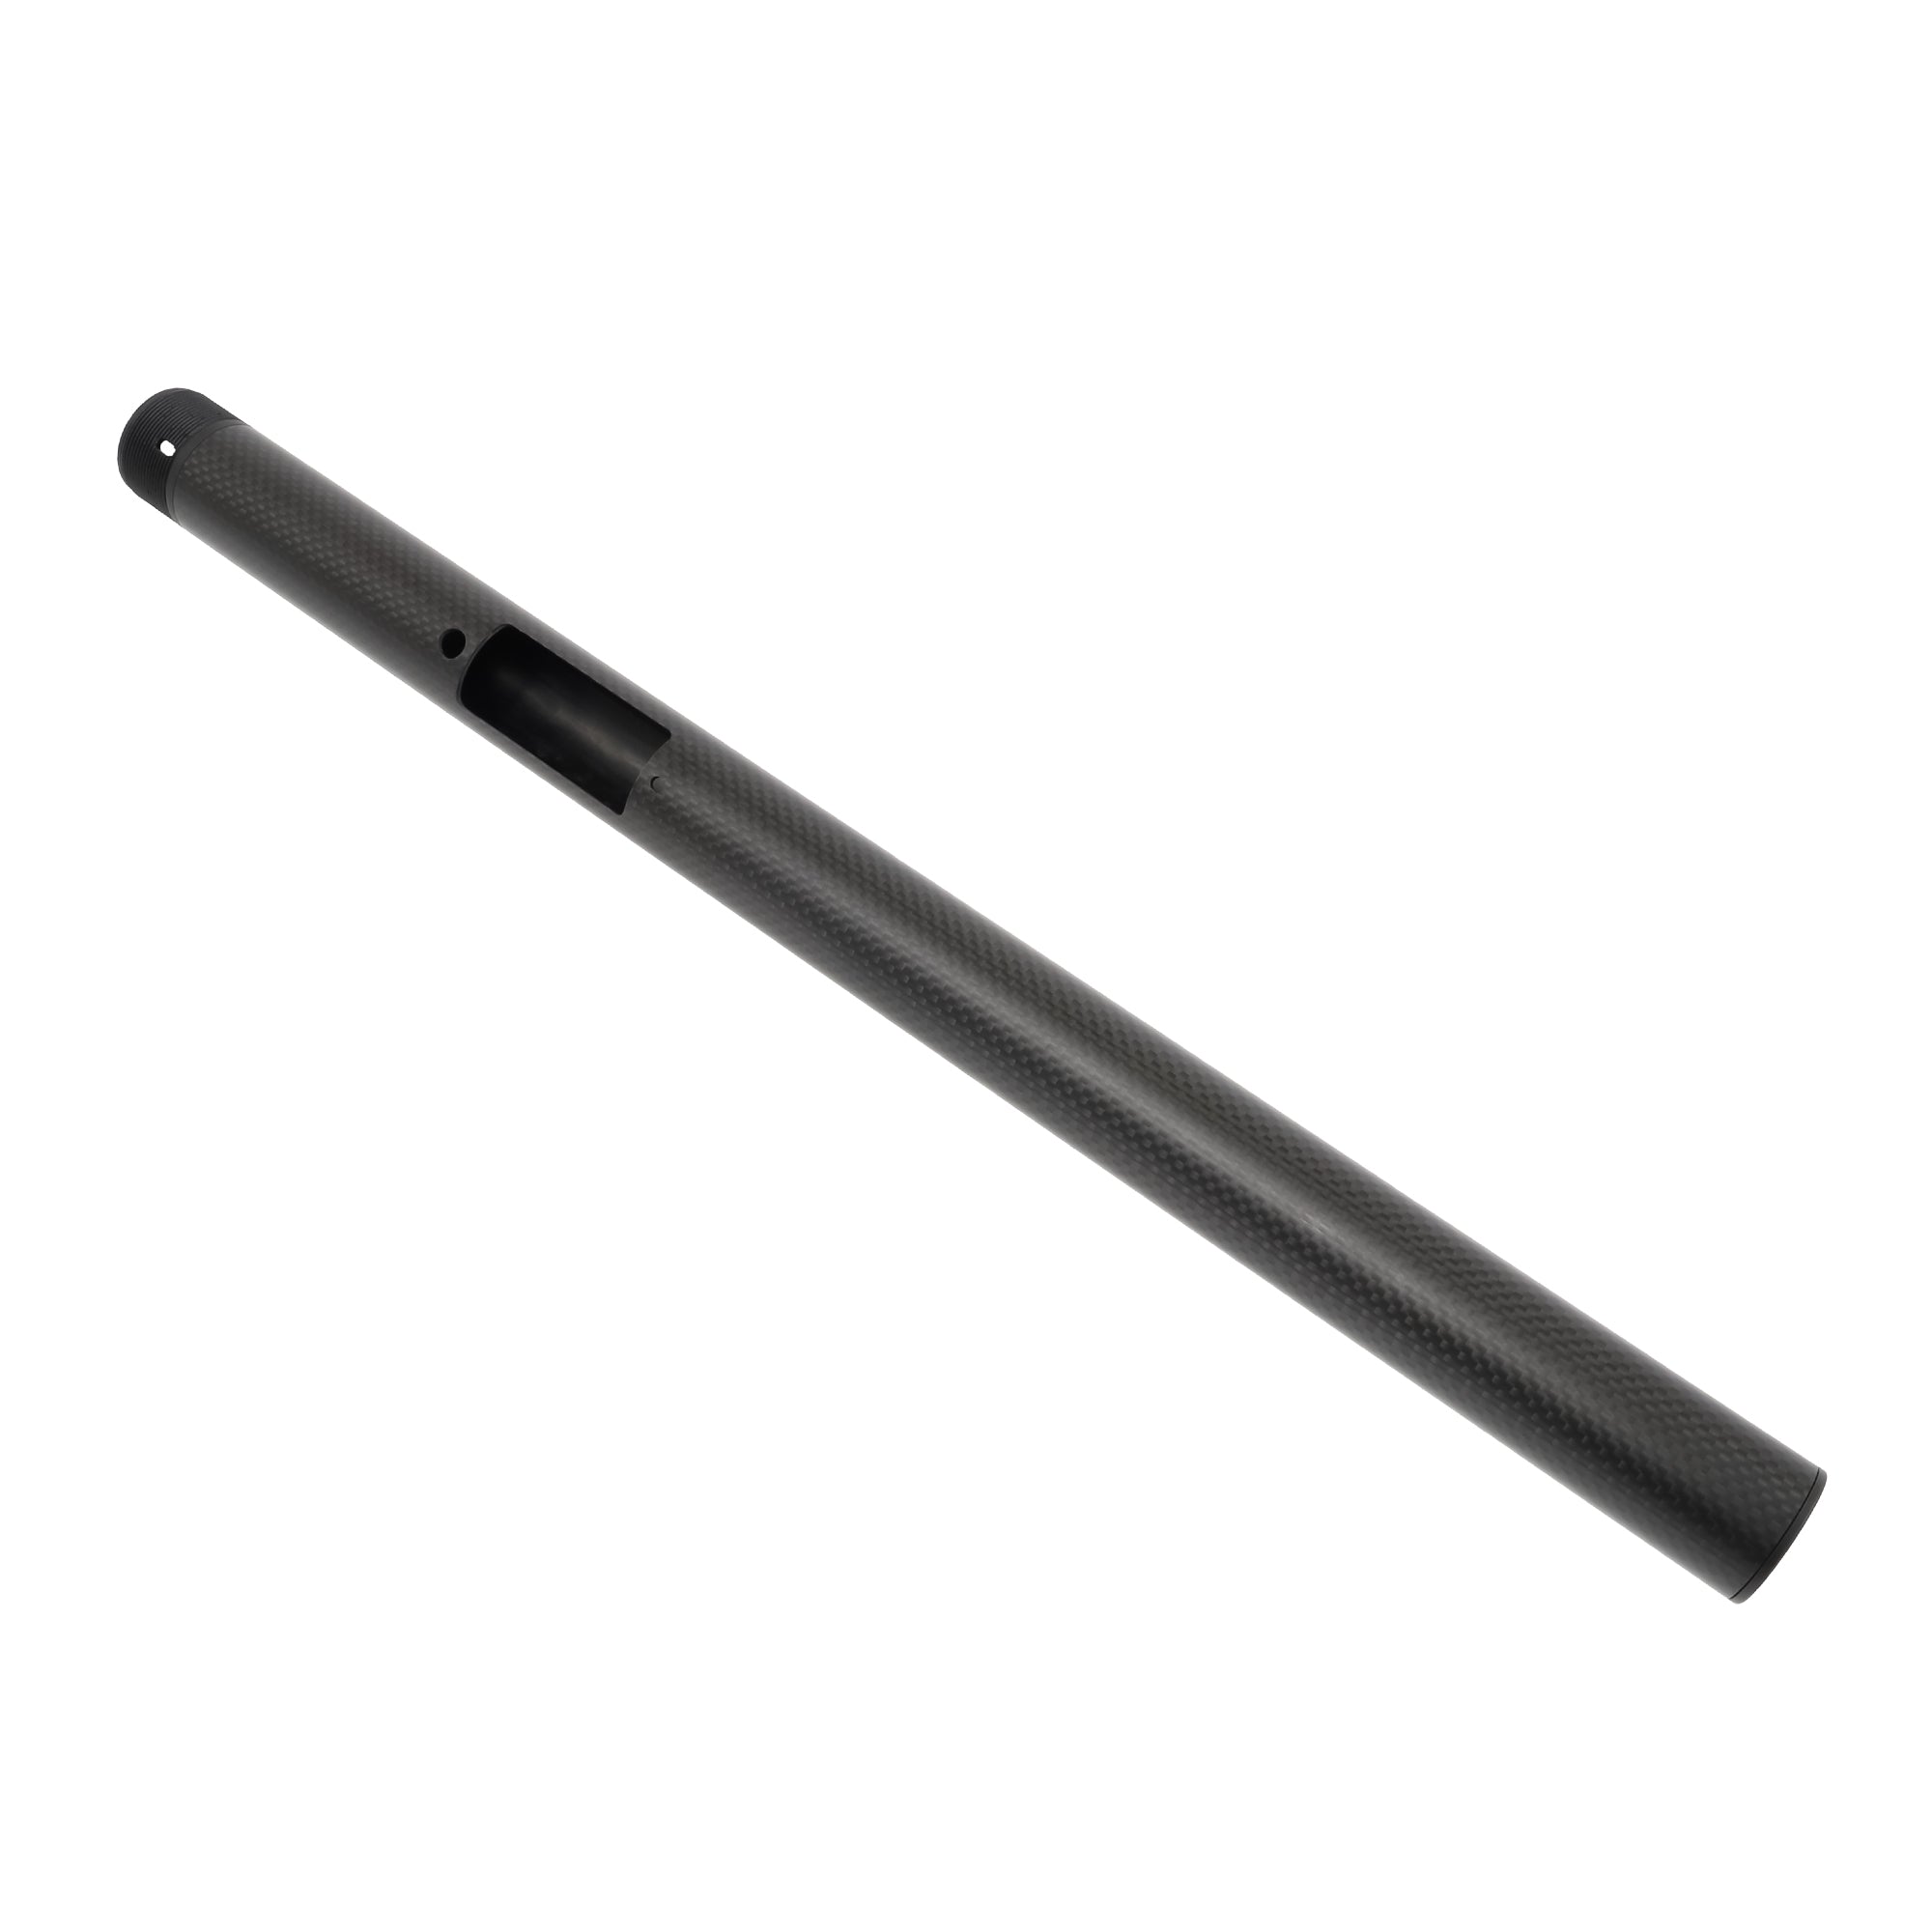 VSR-10 G Spec Carbon Outer Barrel [PSS] [Scheduled to be released in December! Now accepting reservations]